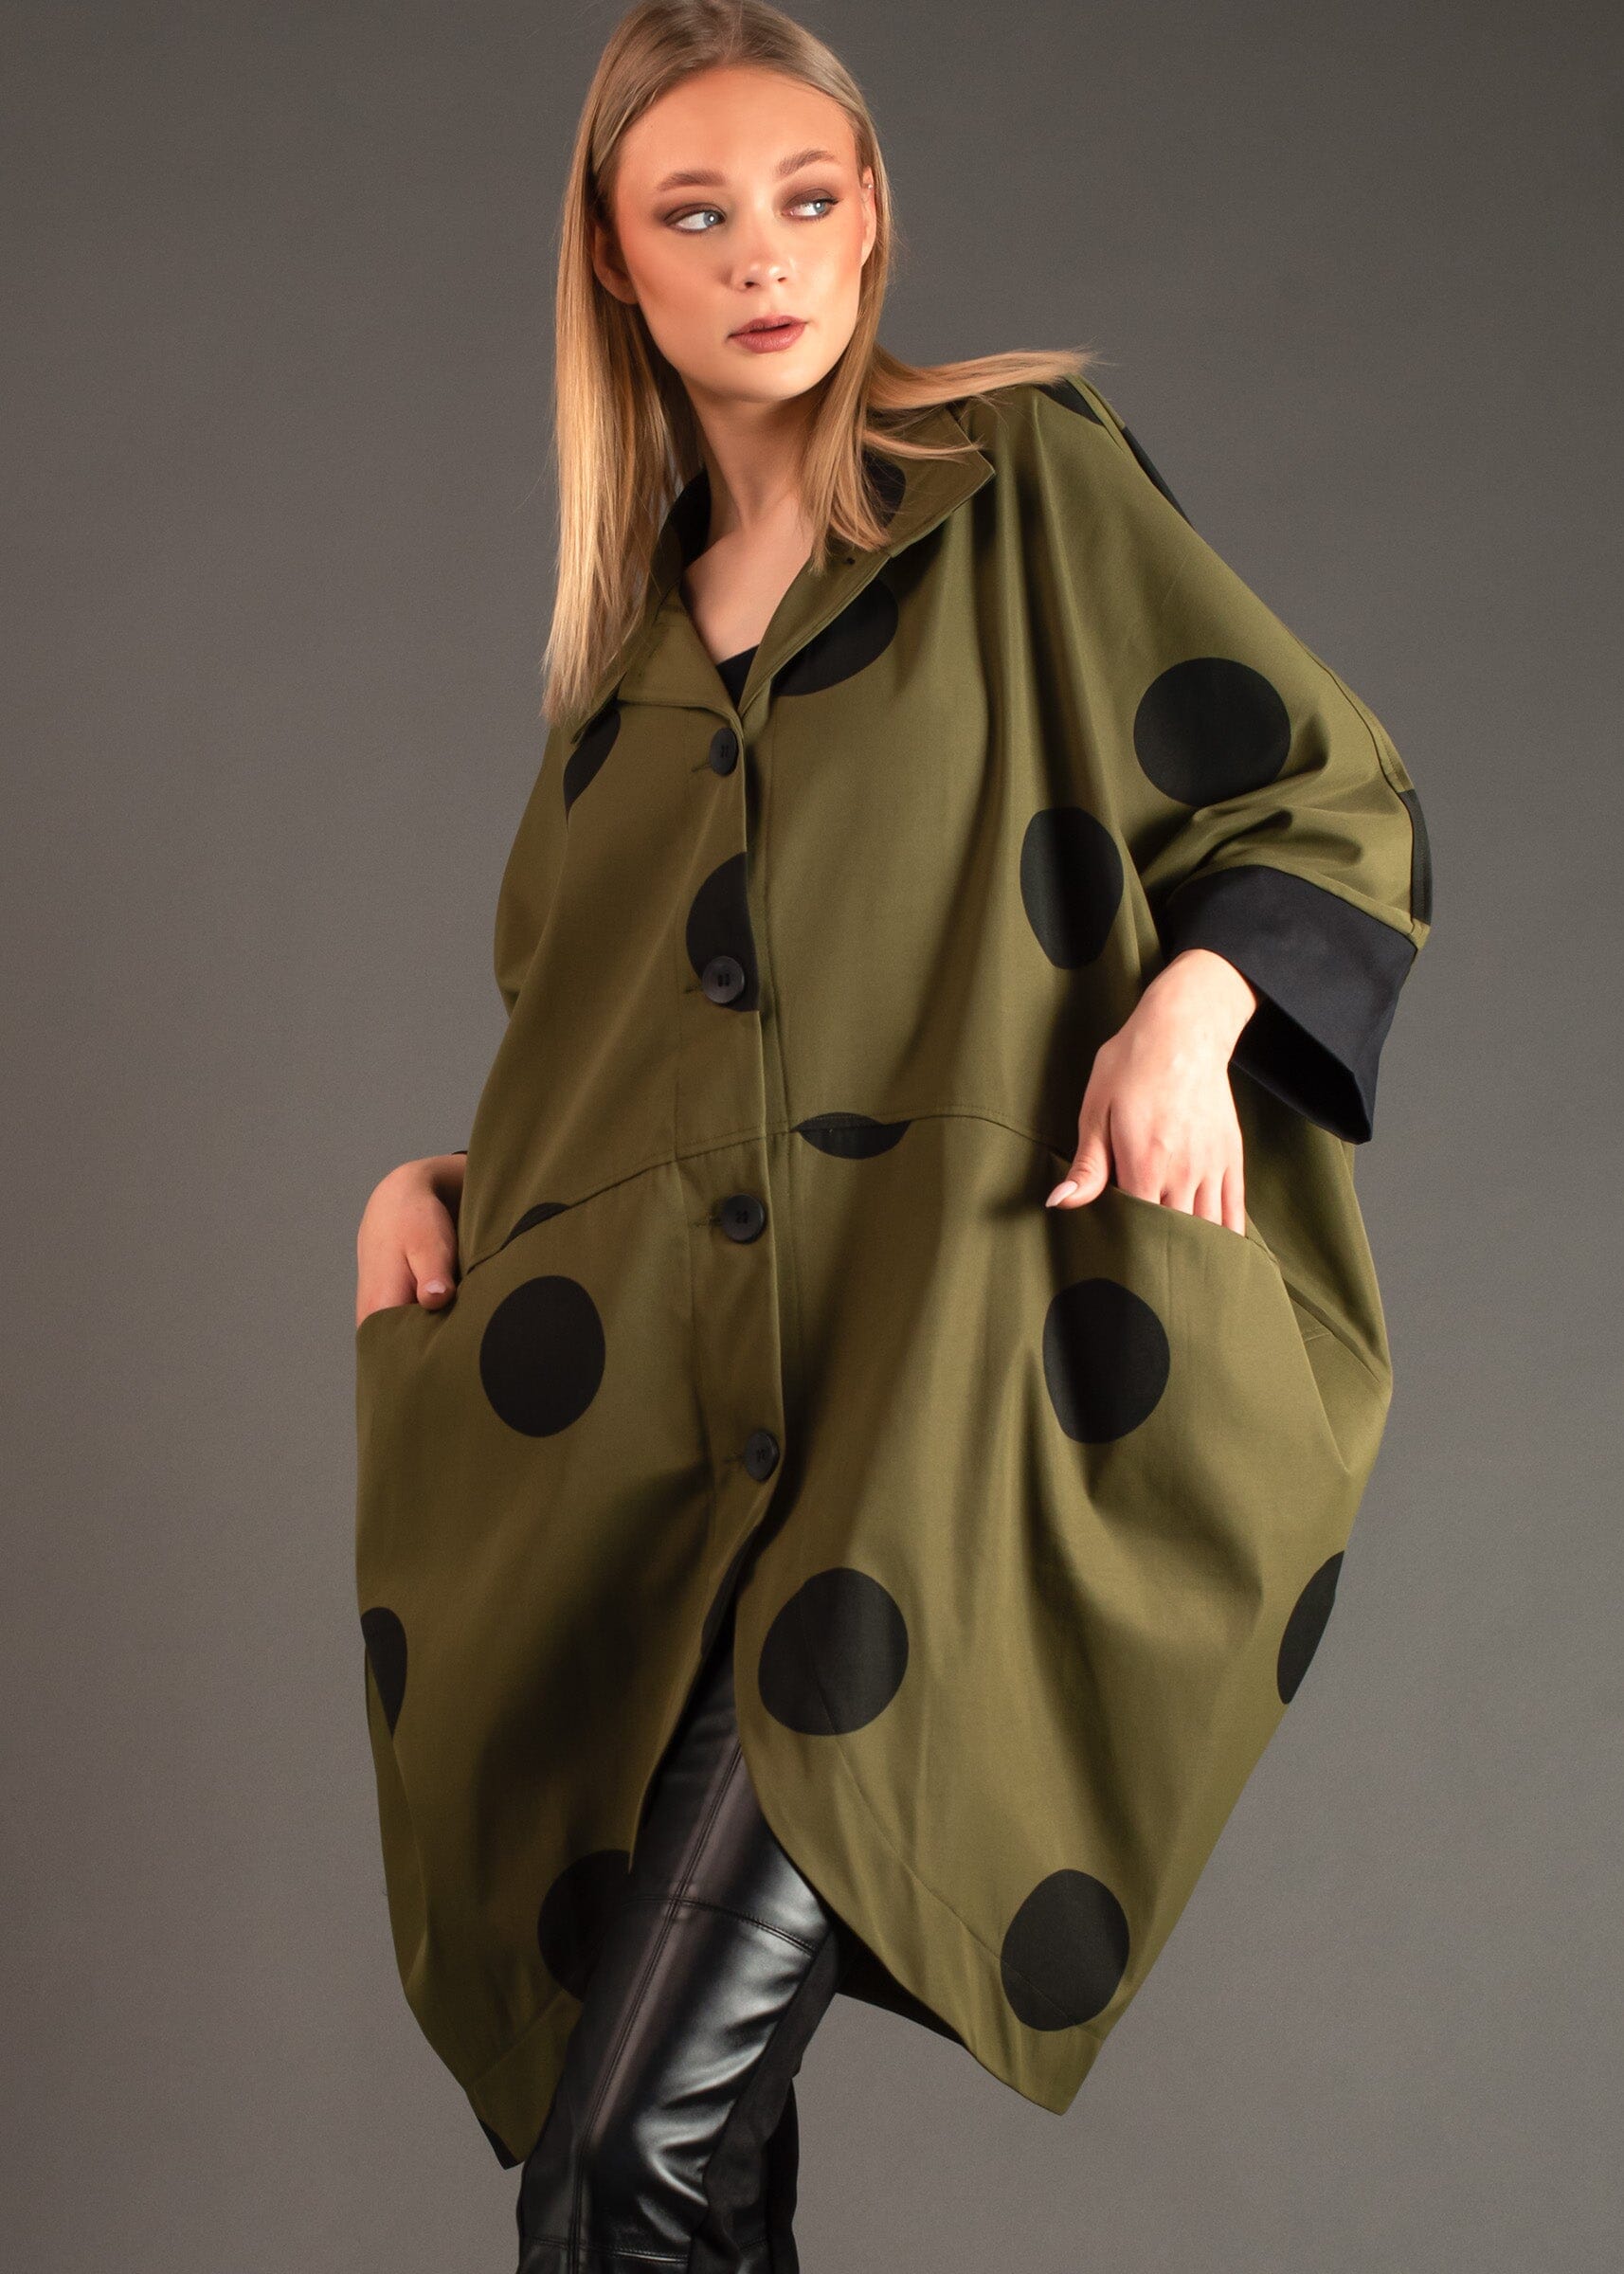 Polka Dot Layering Piece Layering Pieces Kate Hewko One Size Green 